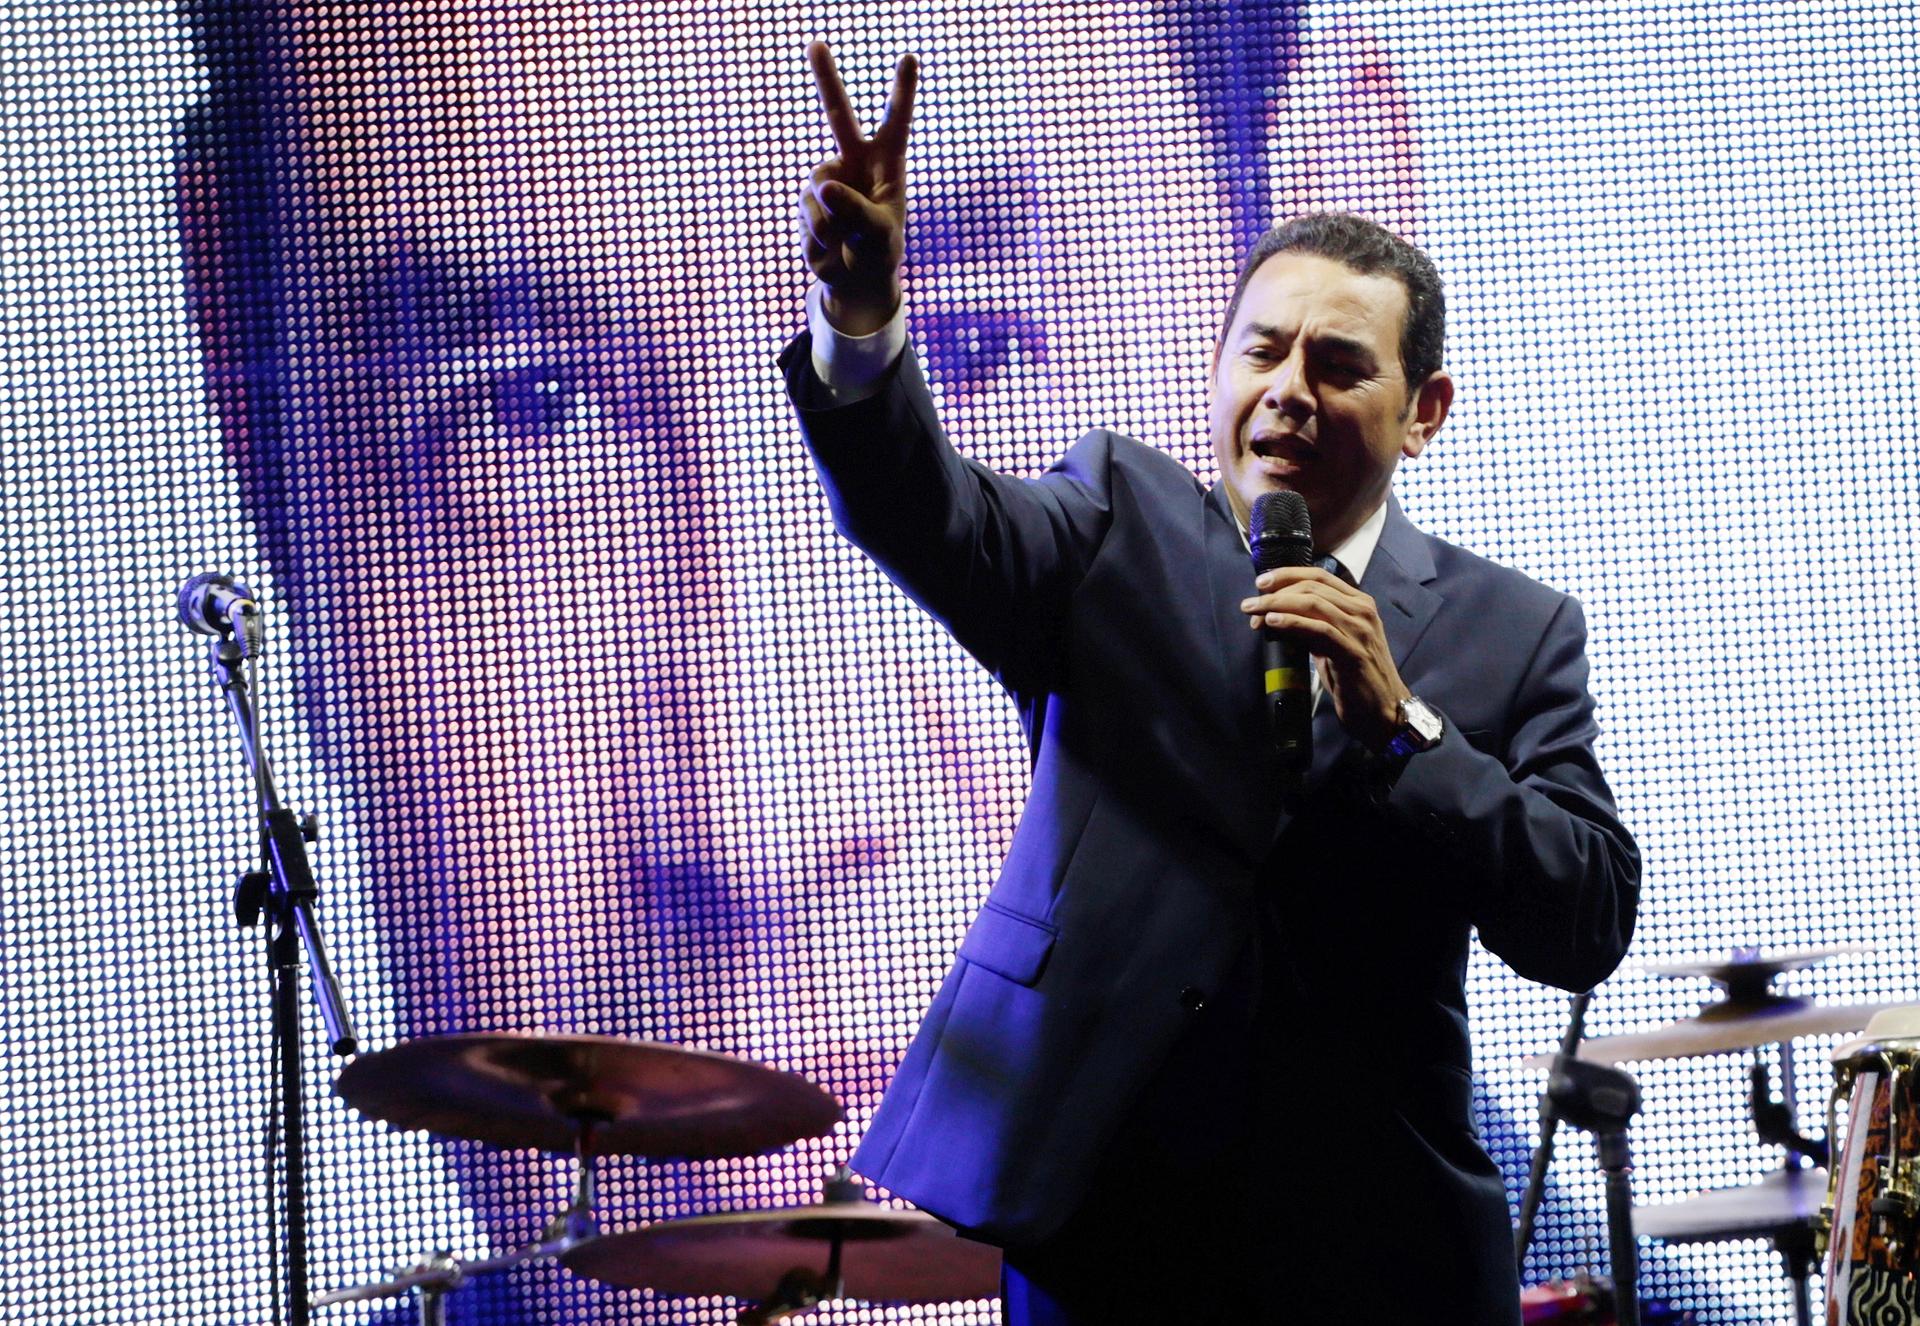 Guatemalan presidential candidate for National Convergence Front, Jimmy Morales, flashes the victory sign as he addresses supporters outside his campaign headquarters in Guatemala City, September 6, 2015.